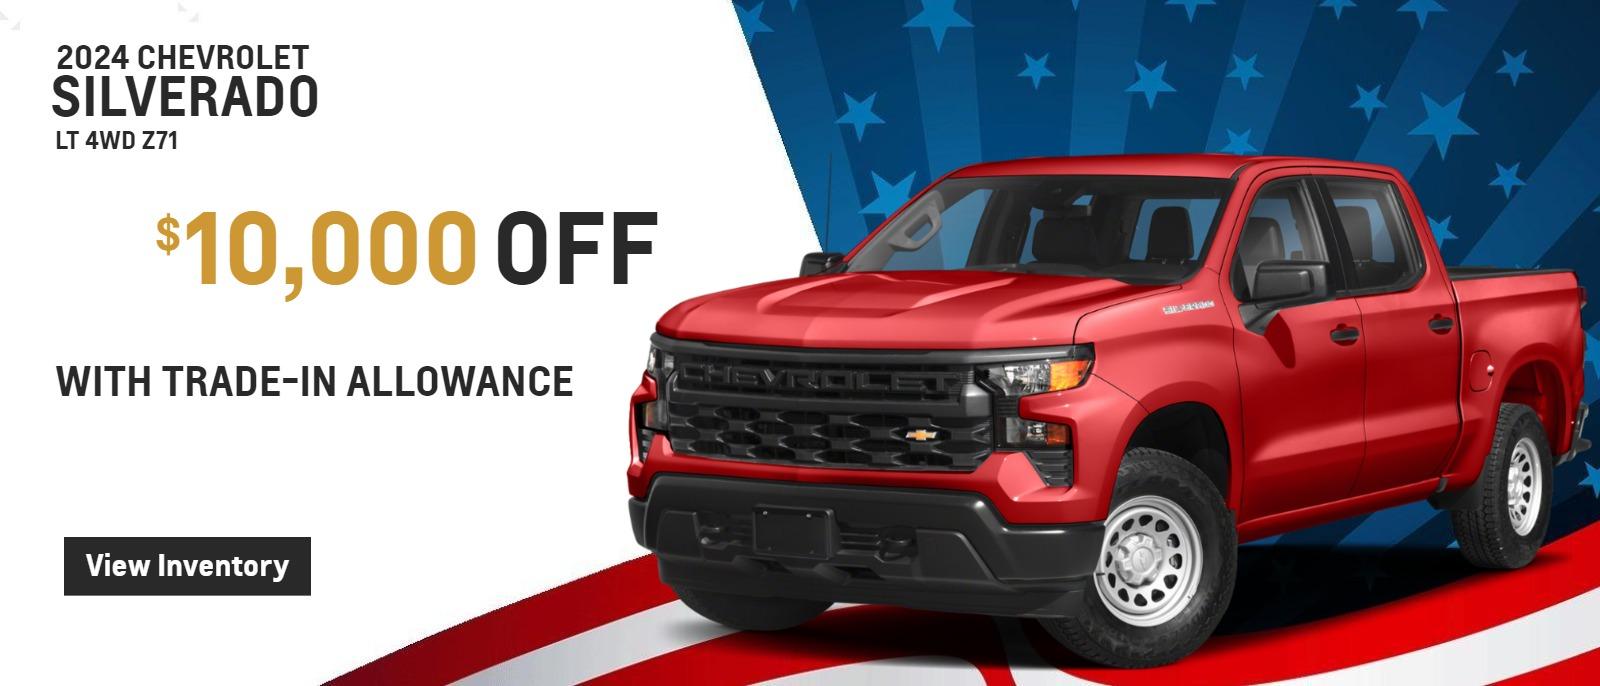 $10,000 off 24 Silverado LT 4WD Z71 with trade in allowance